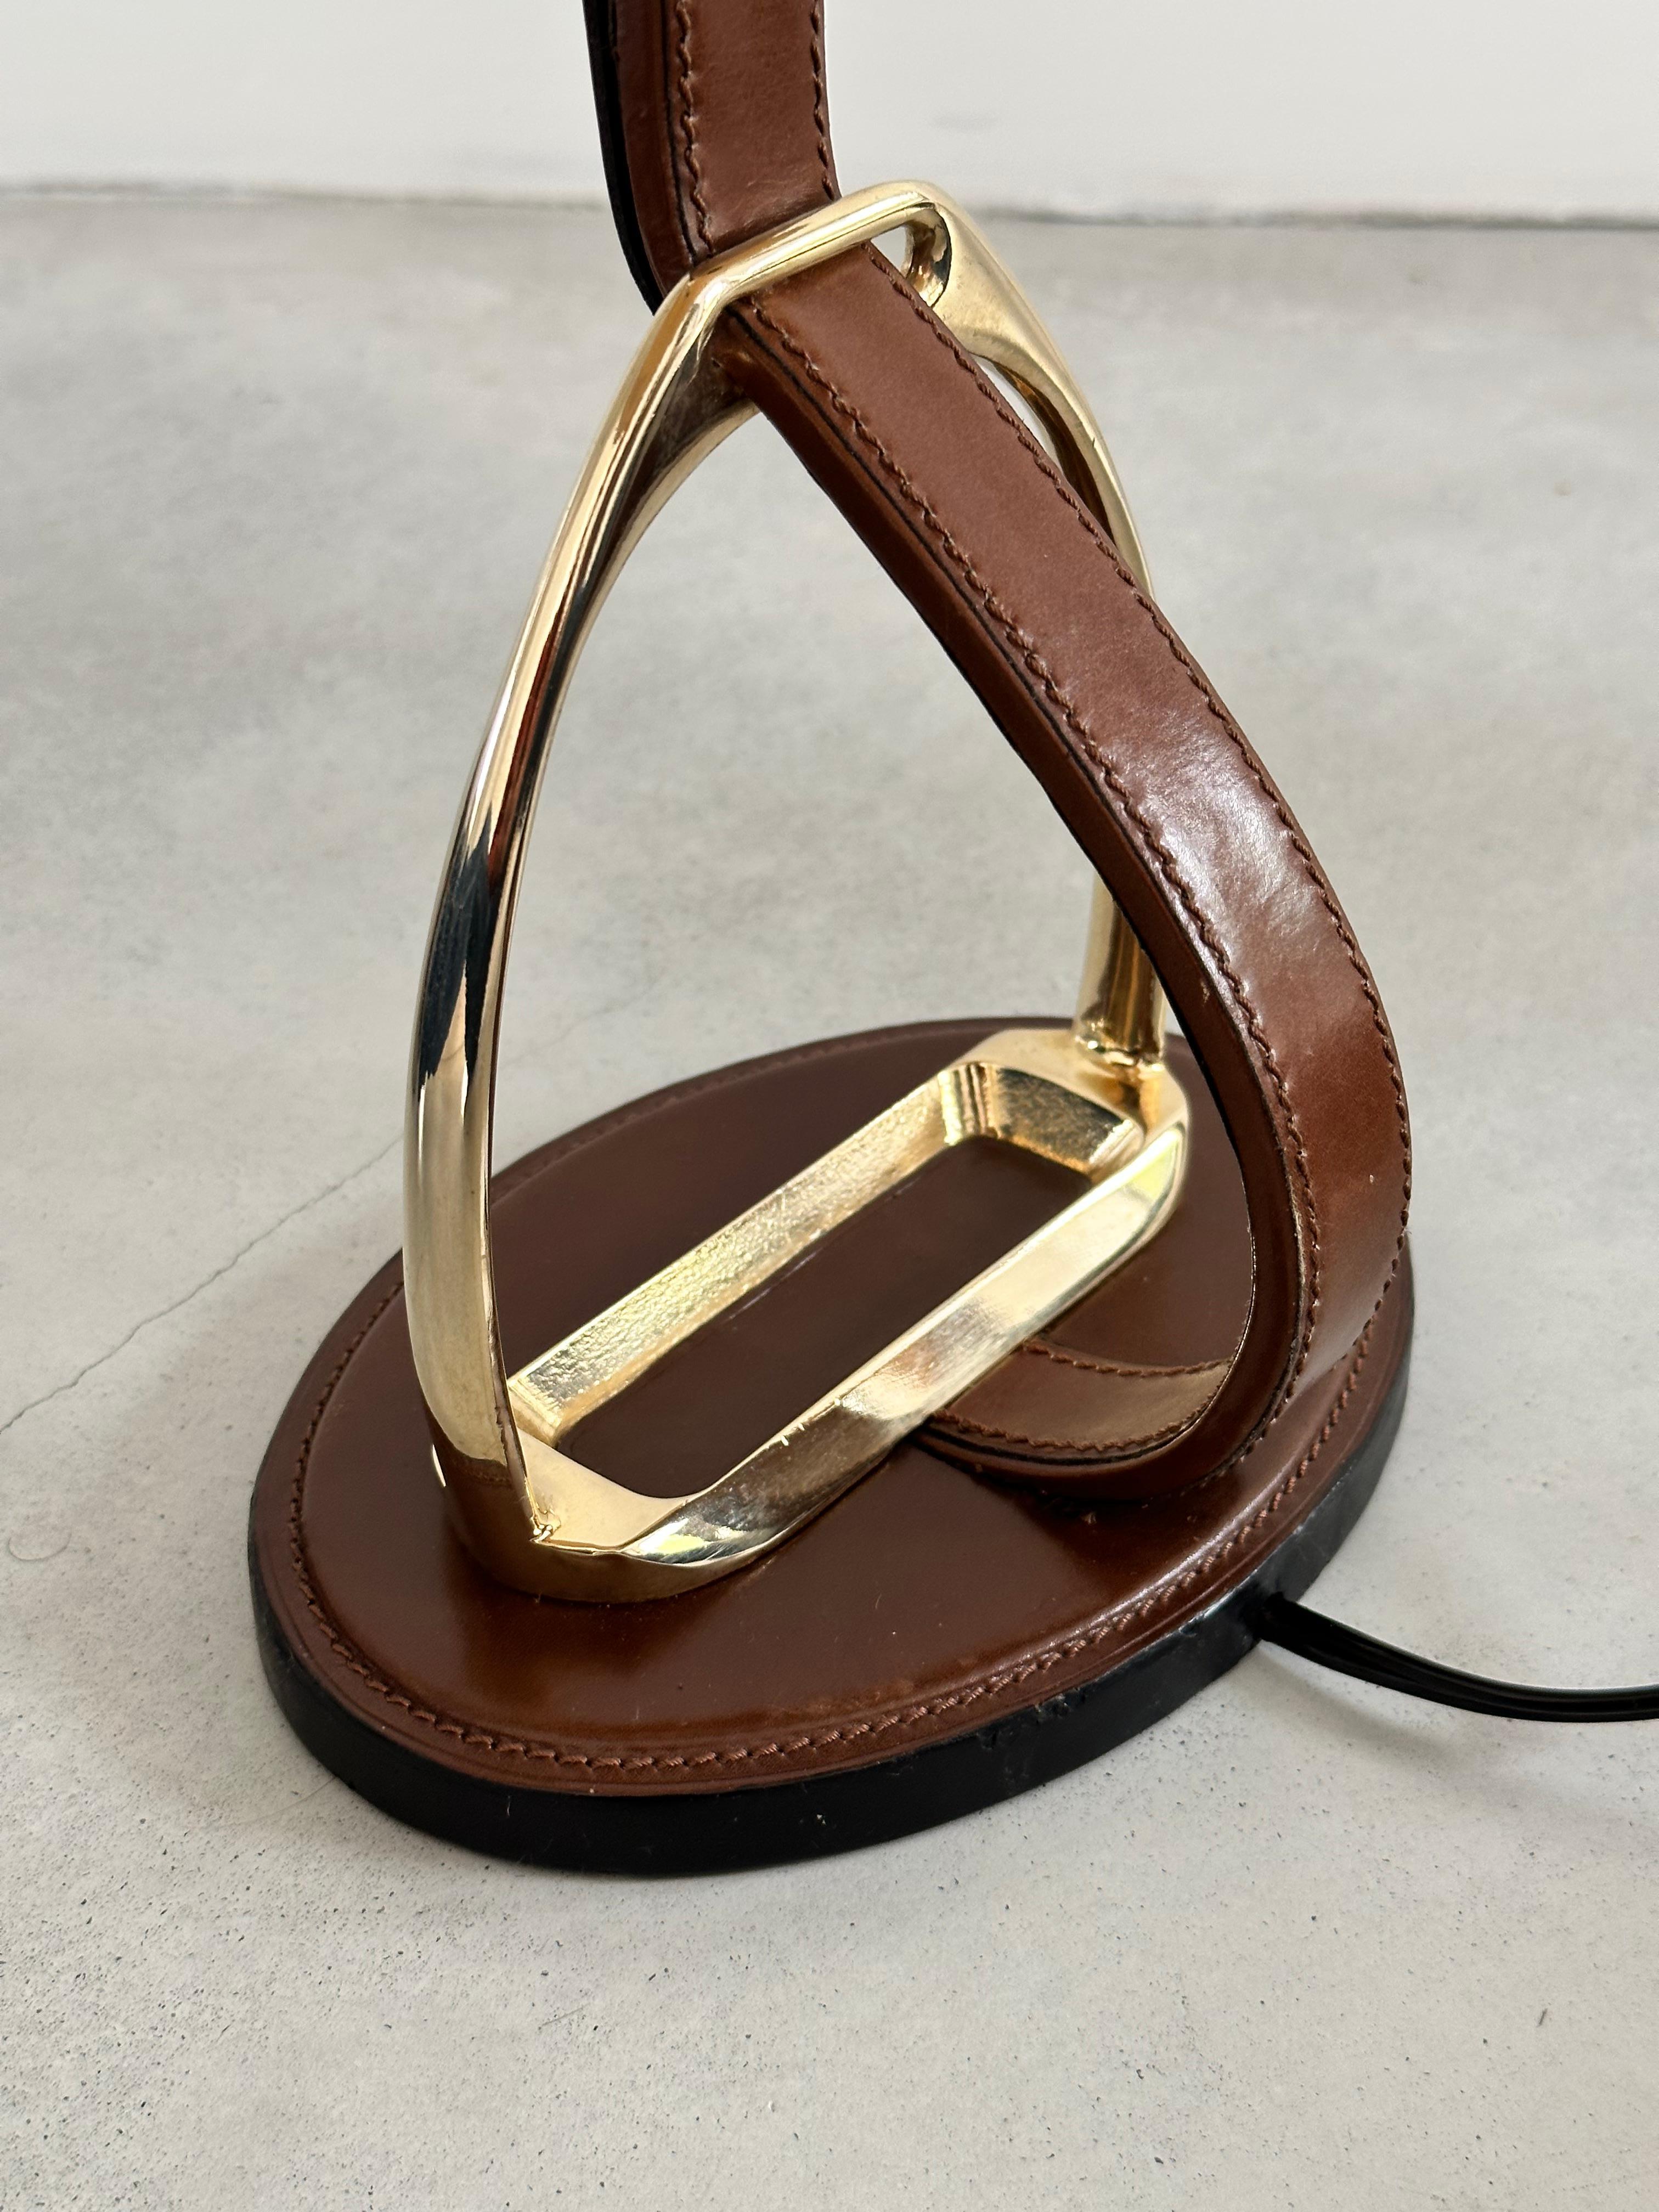 Longchamp design, French Brass & Equestrian Stitched Leather Lamp, 1960s For Sale 9